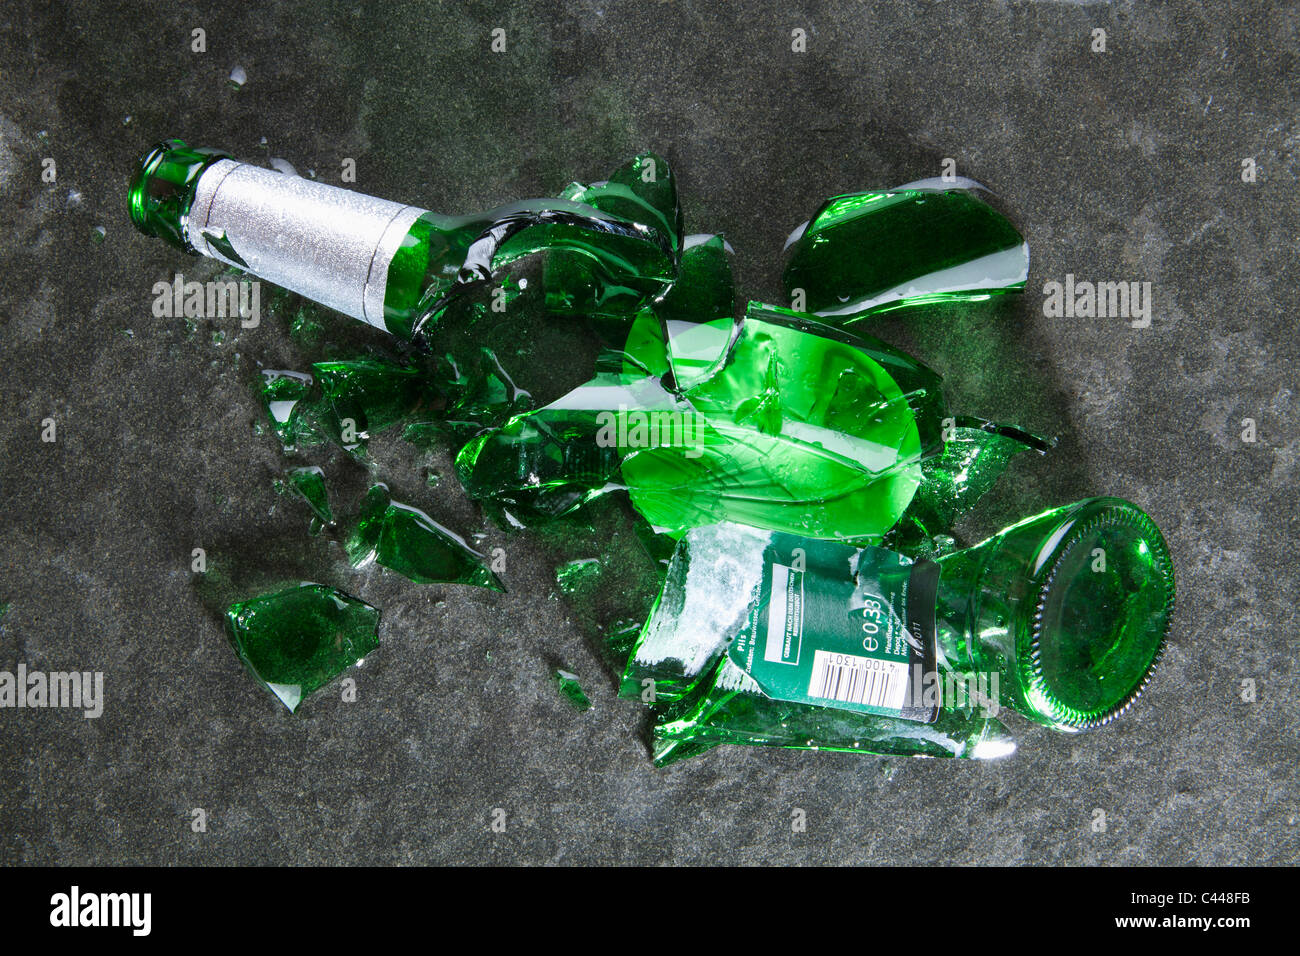 A smashed beer bottle Stock Photo